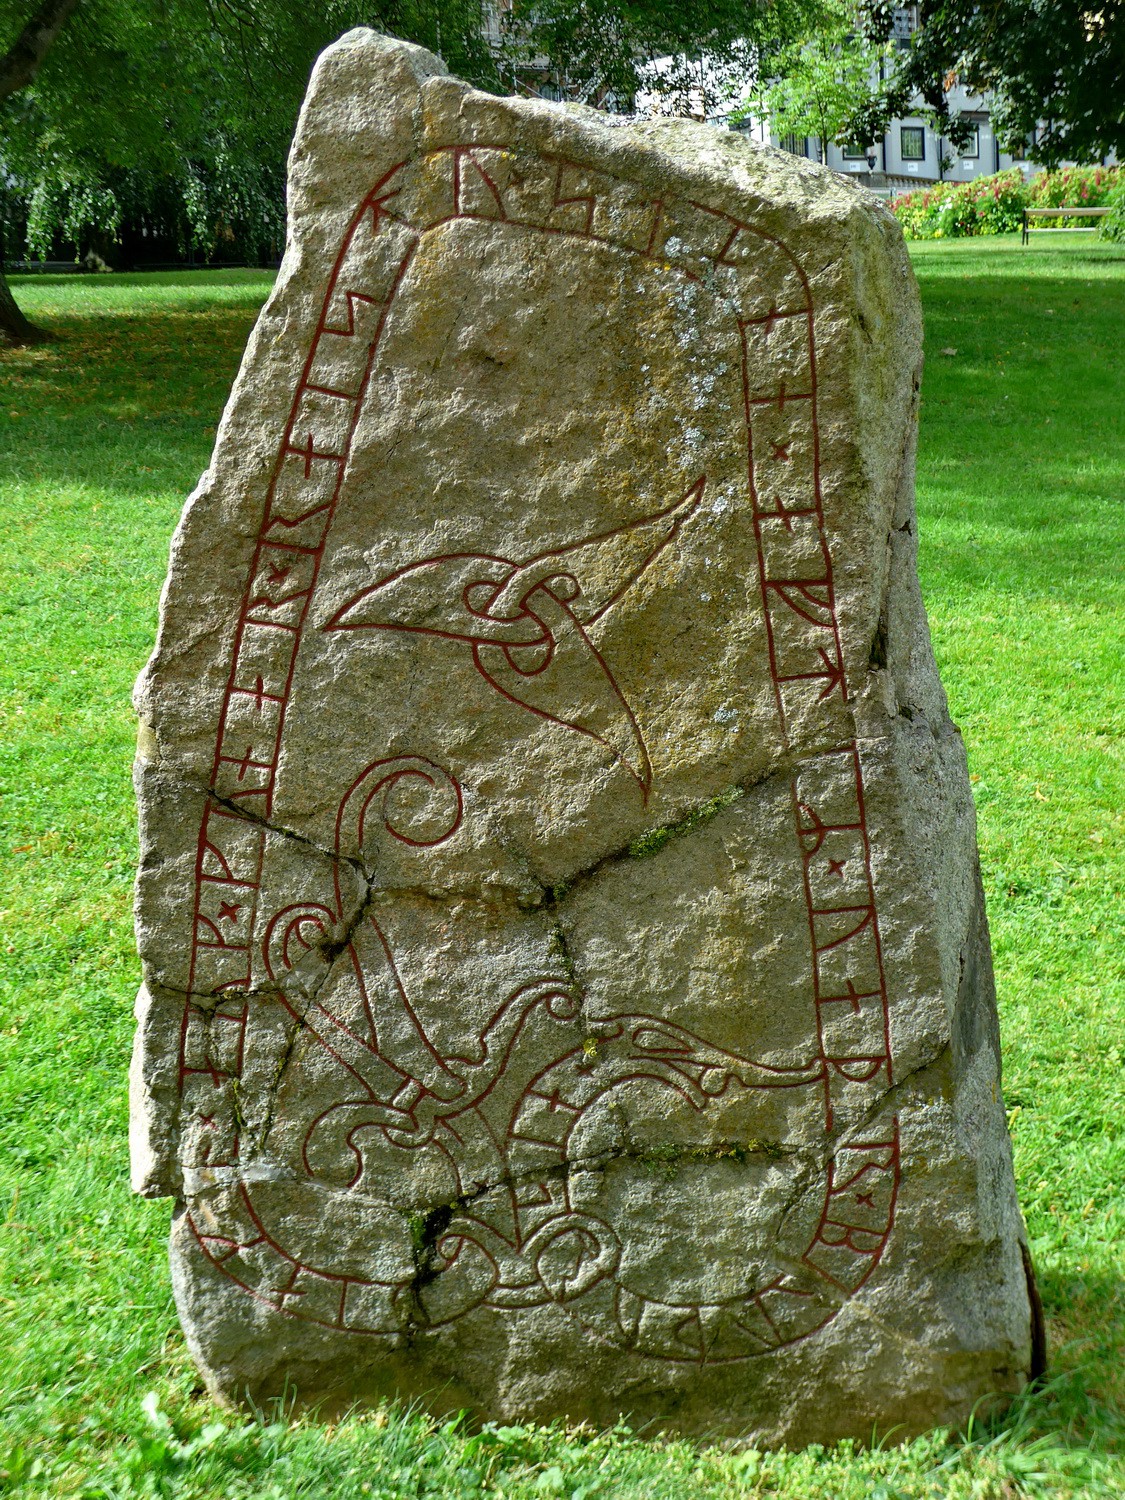 Rune stone with an inscription from the 11th century